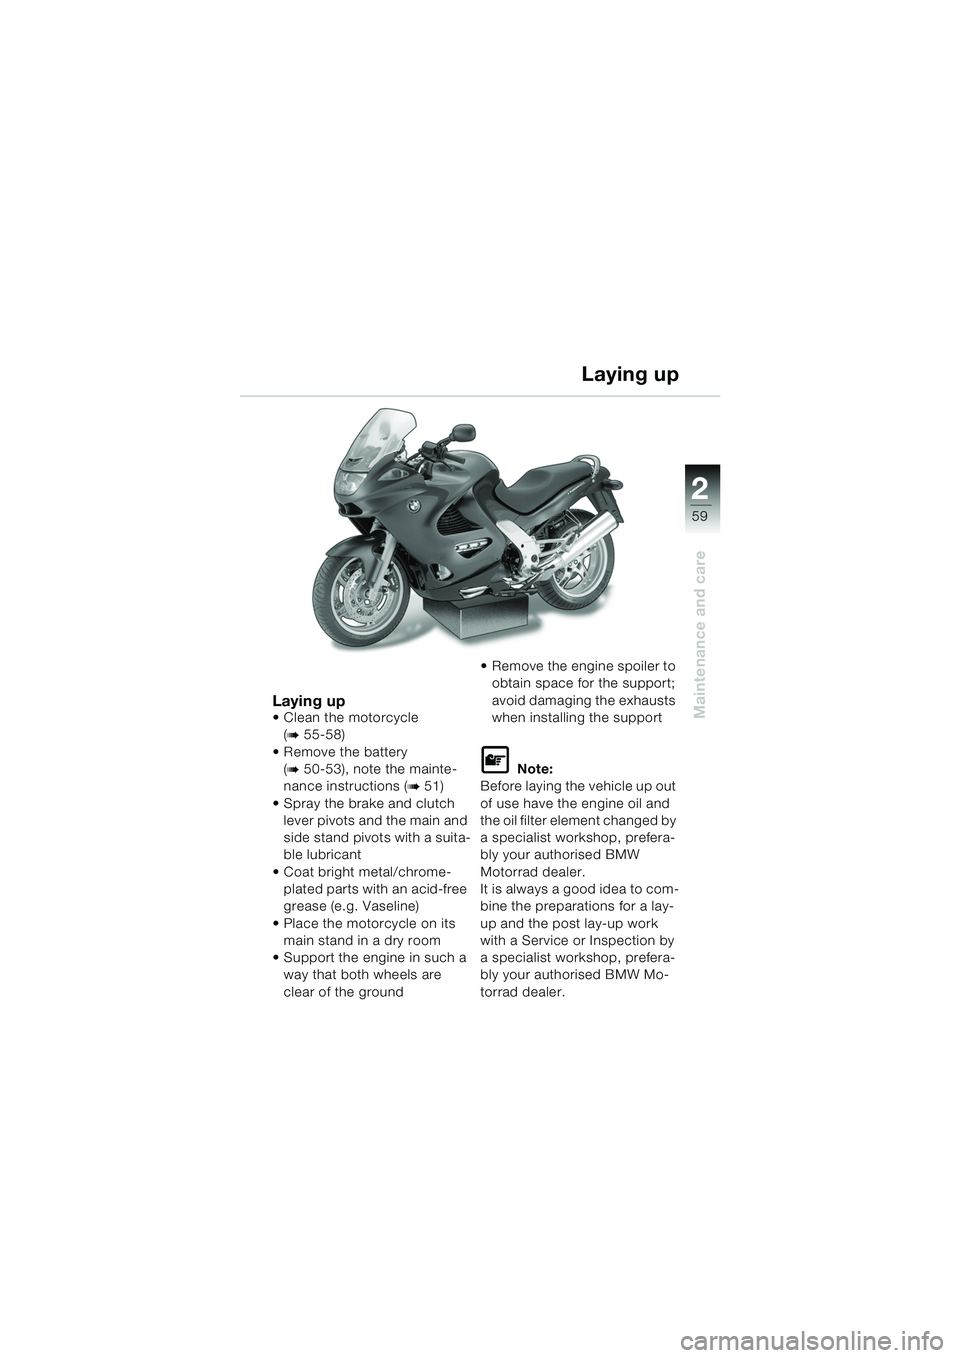 BMW MOTORRAD K 1200 RS 2004  Riders Manual (in English) 59
Maintenance and care
2
Laying upClean the motorcycle (
b 55-58) 
 Remove the battery  (
b 50-53), note the mainte-
nance instructions (
b 51)
 Spray the brake and clutch  lever pivots and the ma